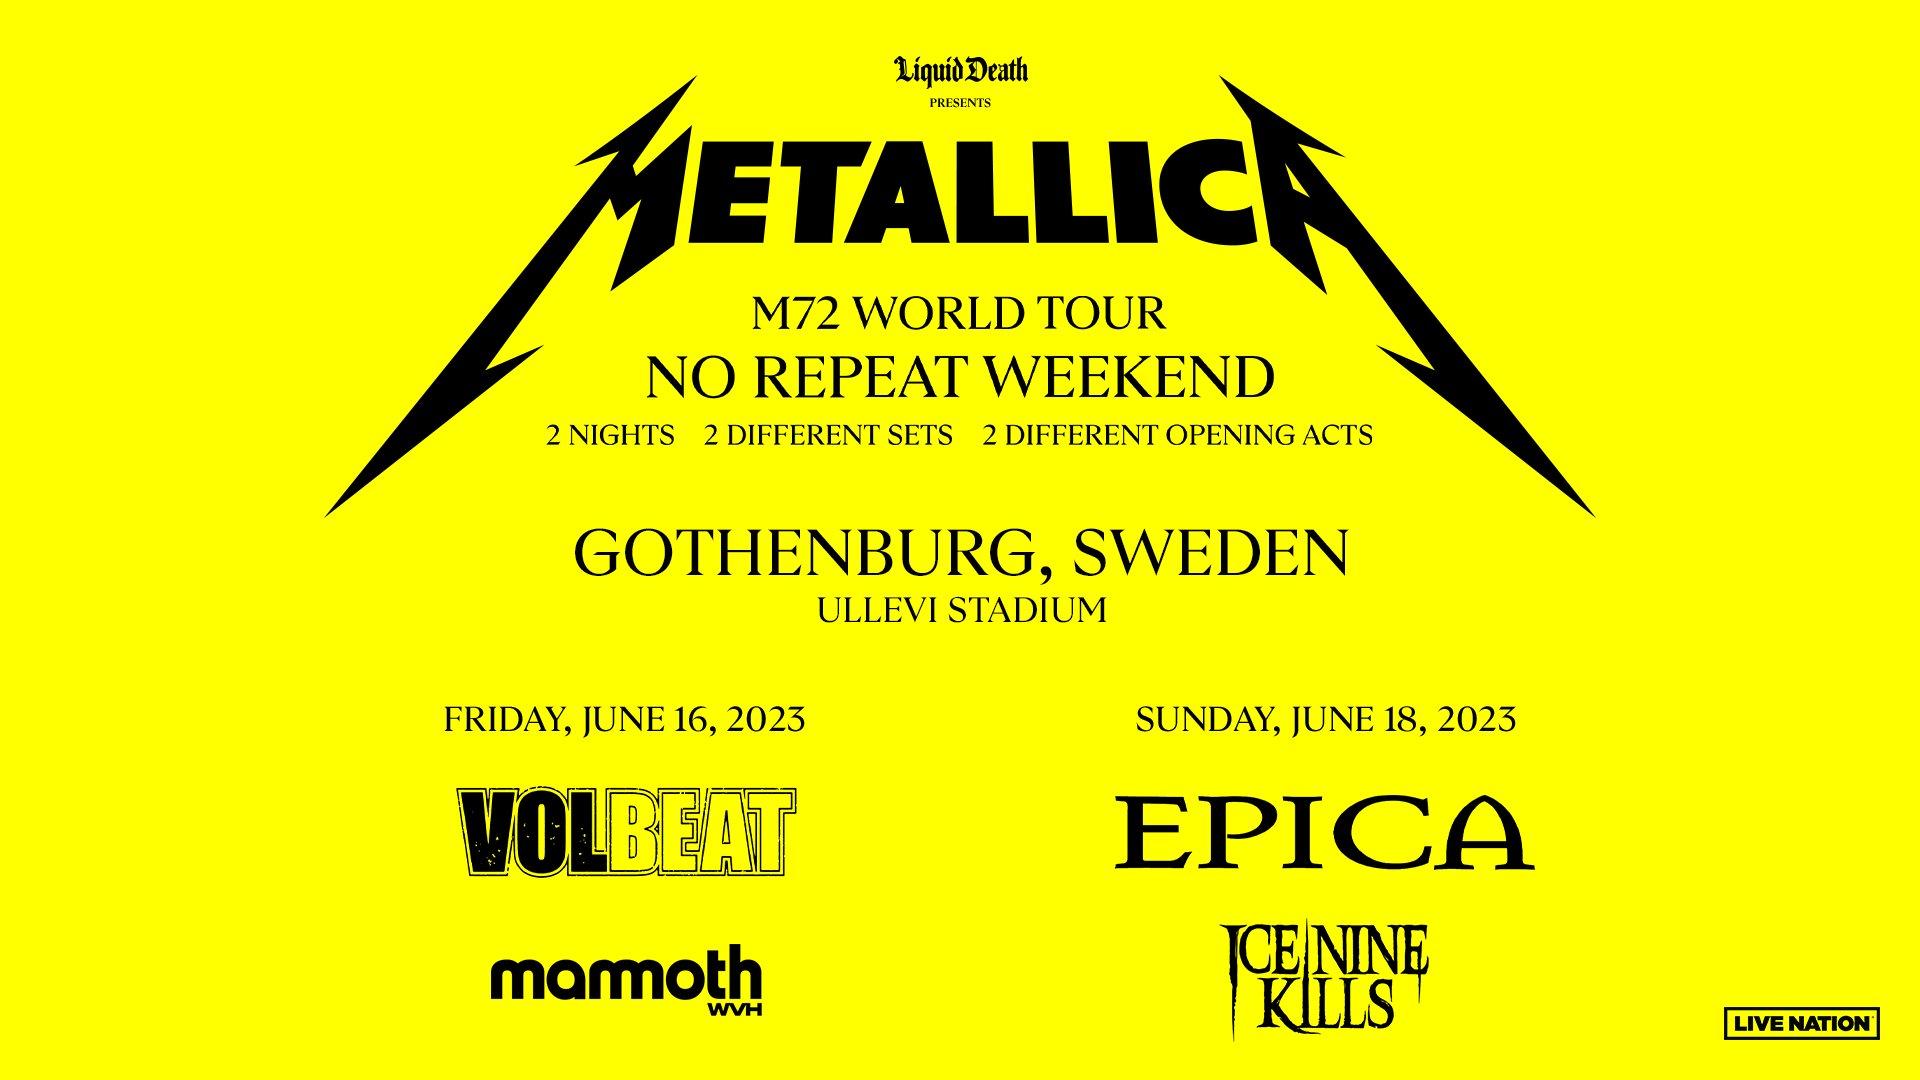 2023-06-02 Epica to Replace Five Finger Death Punch in Gothenburg